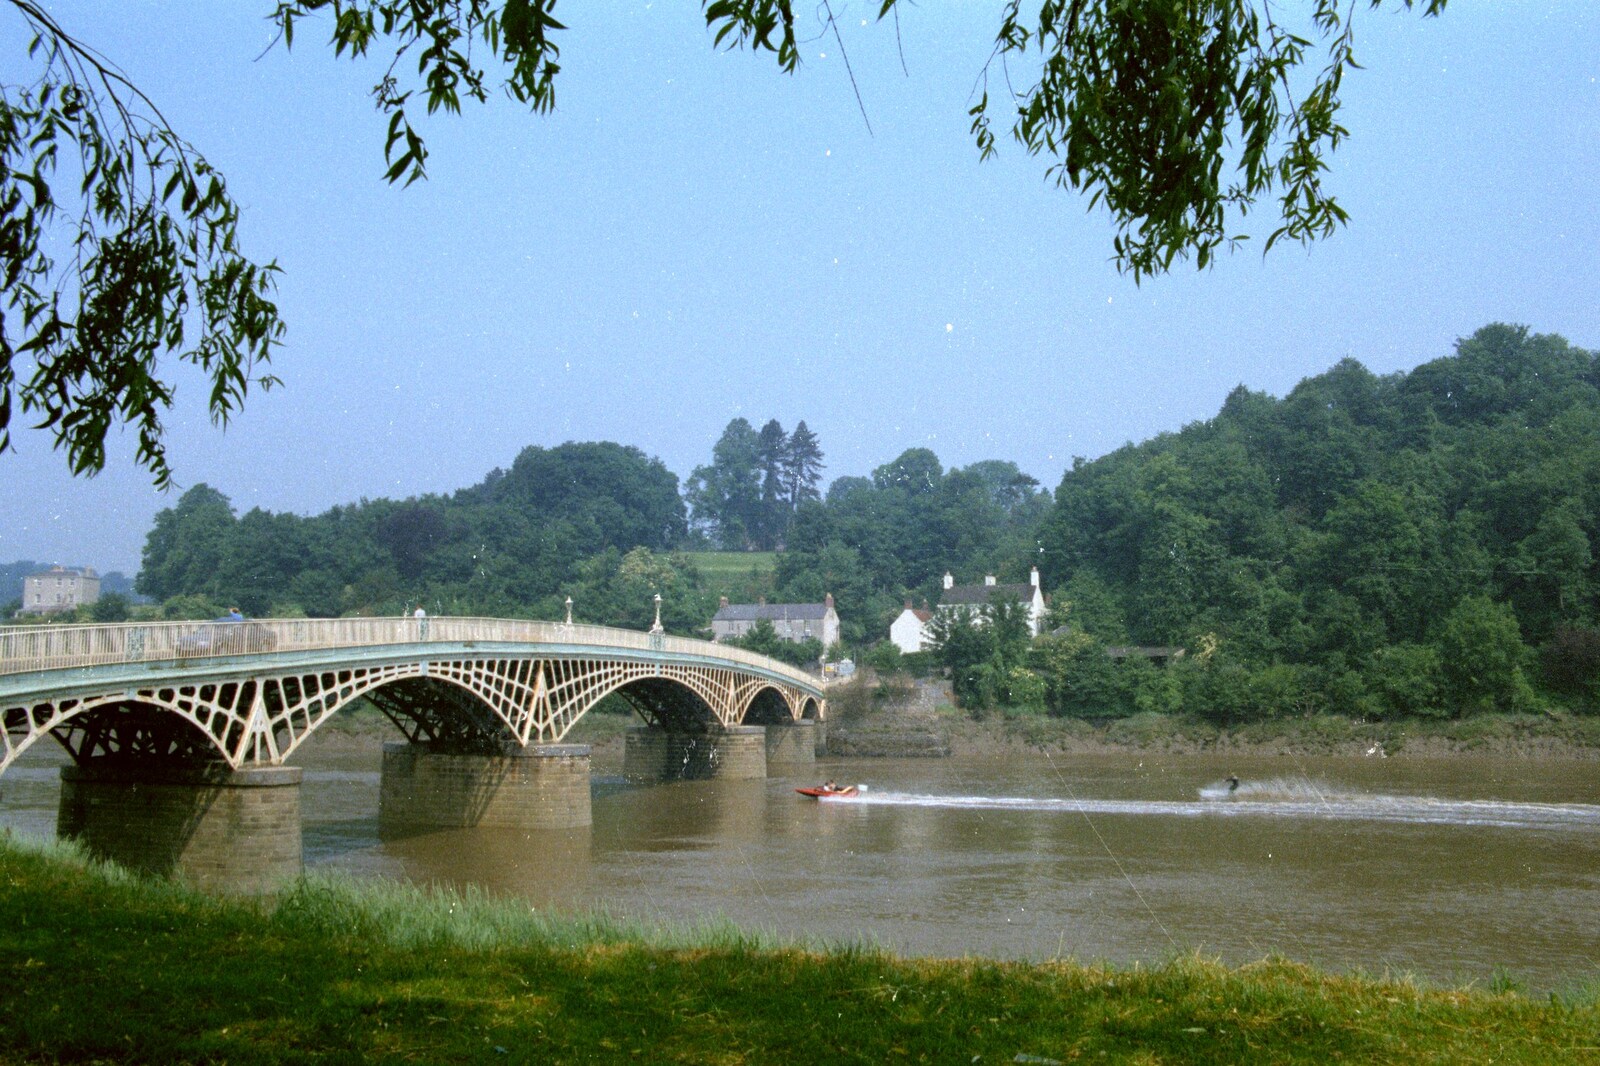 Bridge over the River Wye from A Trip to Chepstow, Monmouthshire, Wales - 5th July 1986